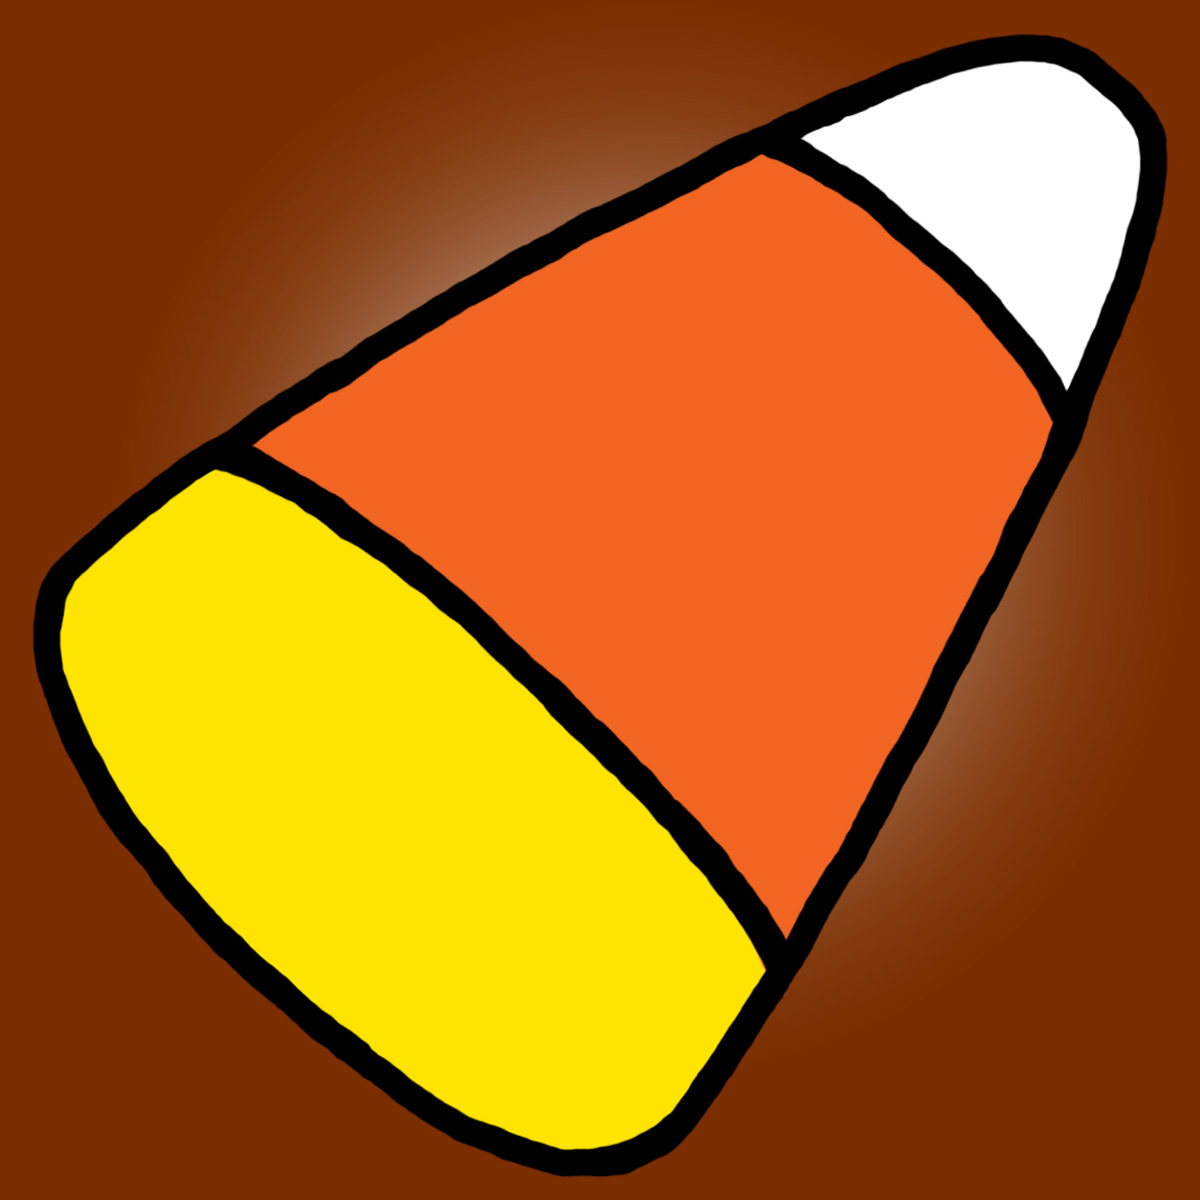 Candy corn clipart 4